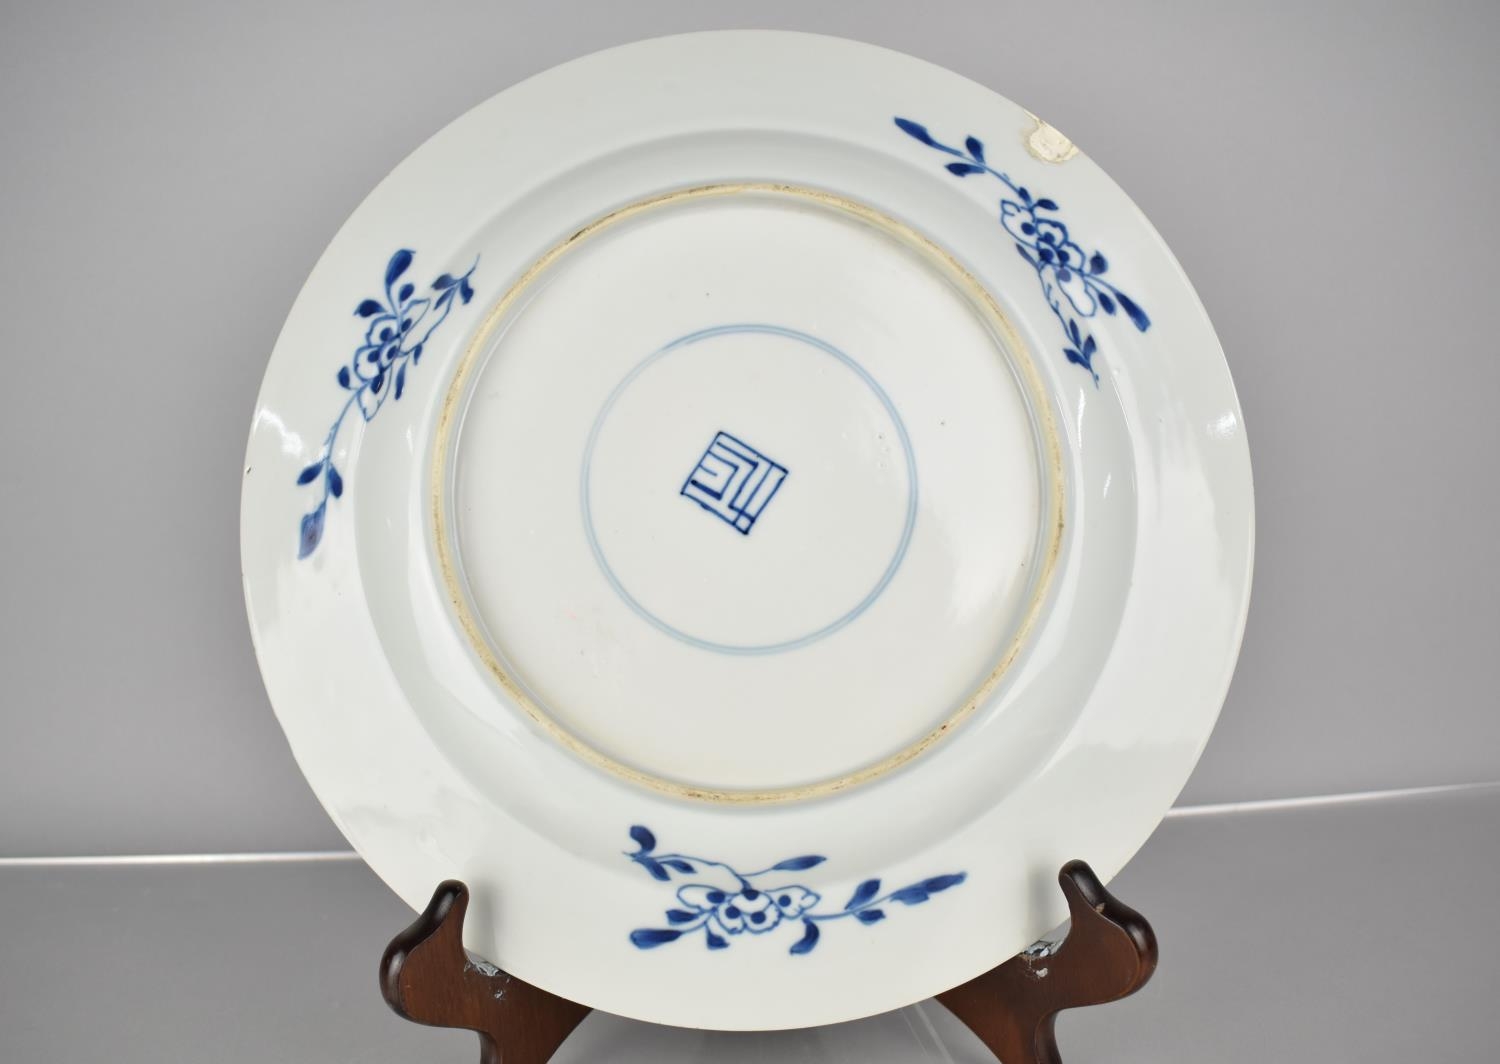 A 19th Century Chinese Porcelain Blue and White Plate Decorated in a Floral Motif, the back with - Image 4 of 4